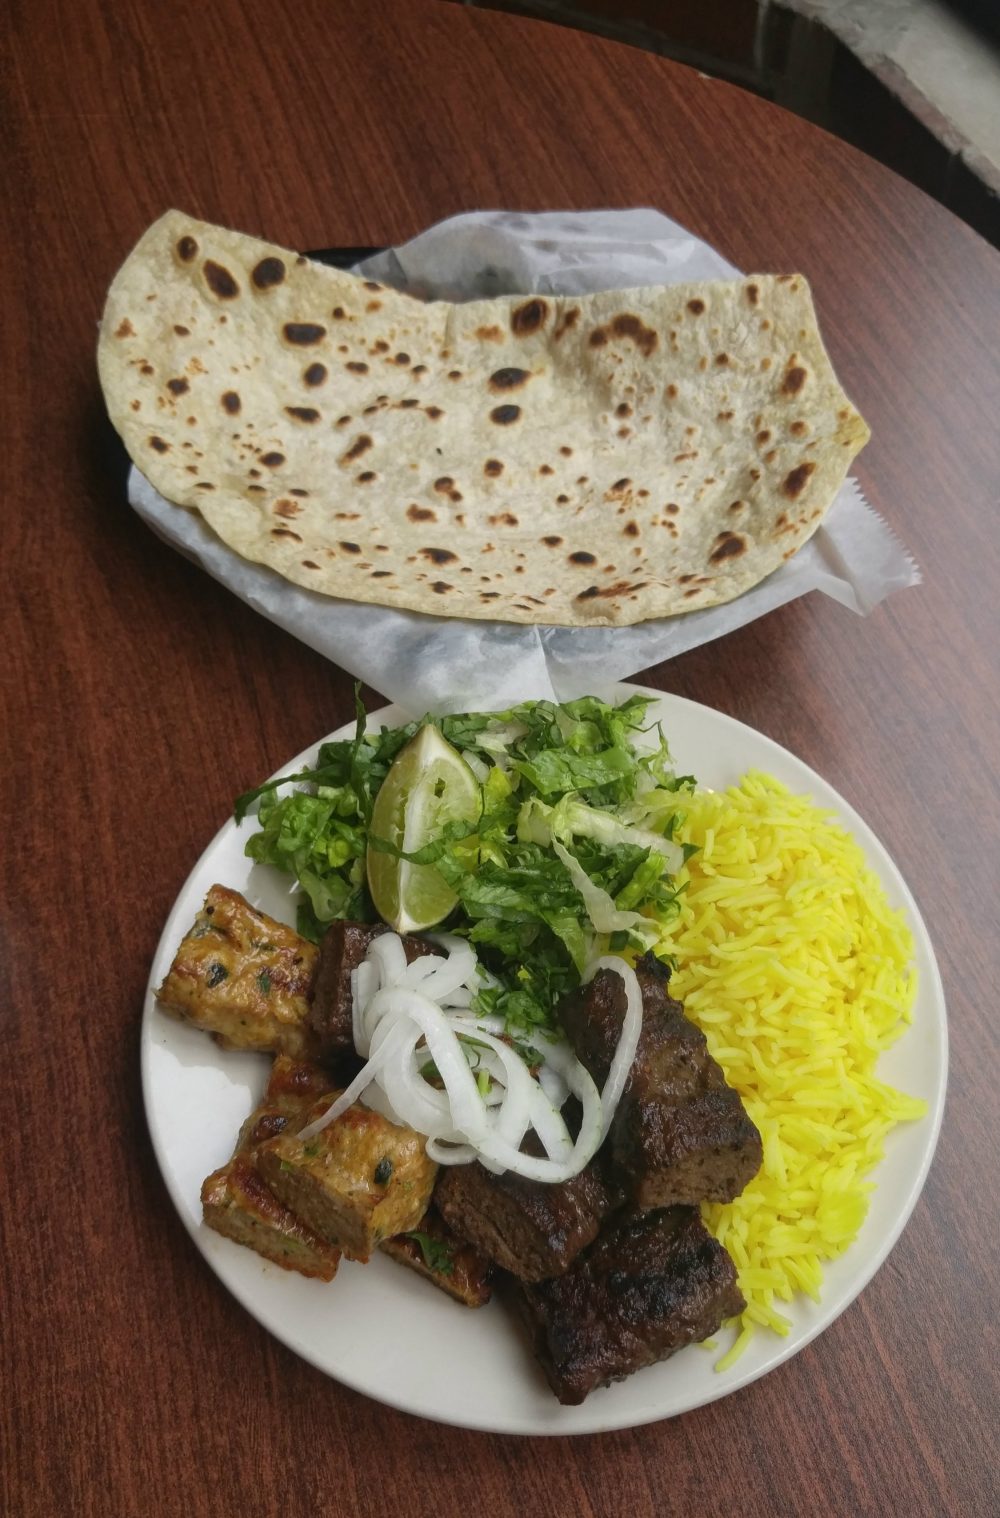 The Lunch Special at J.K. Kabab House: seekh kabab, chicken kabab, rice, salad, and bread